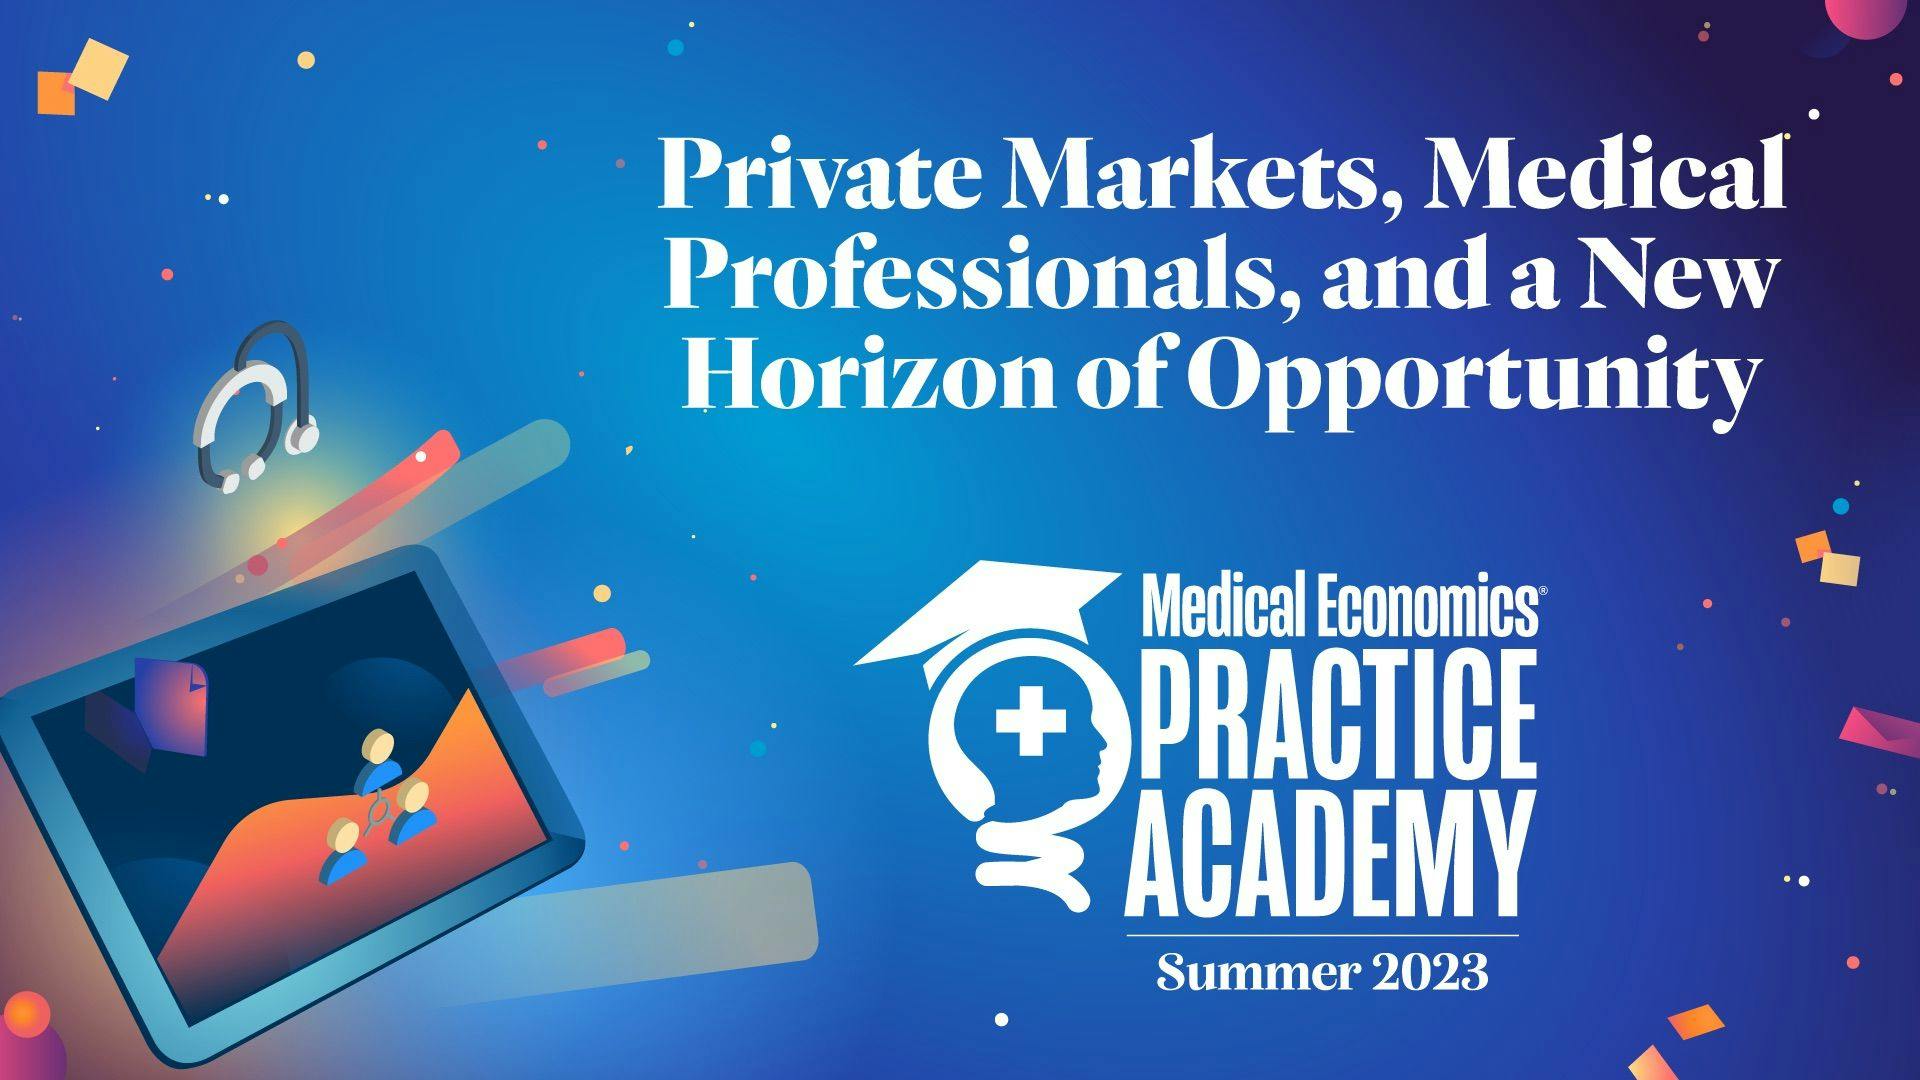 Private Markets, Medical Professionals, and a New Horizon of Opportunity